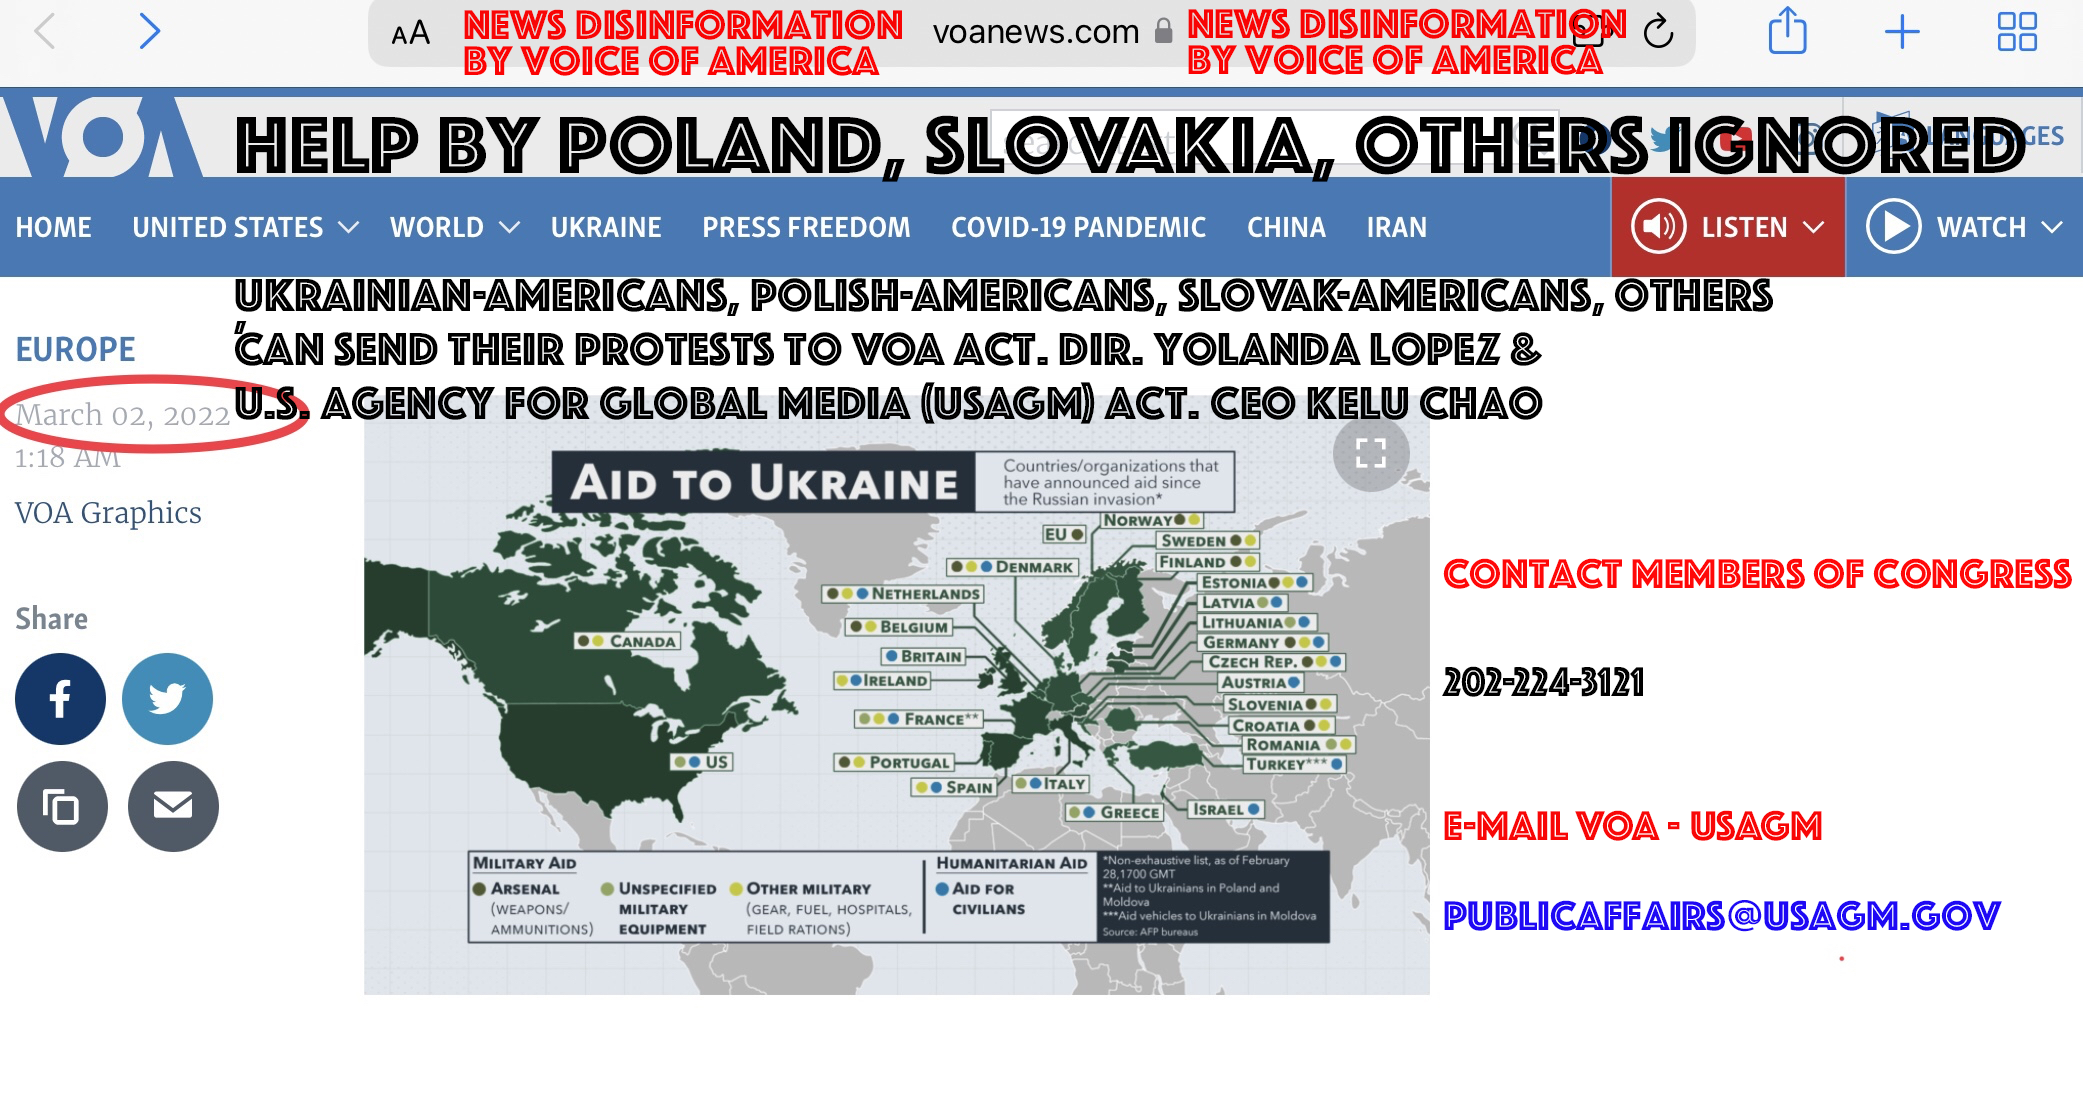 Polish Americans, Slovak Americans joined Iranian, Chinese, and other immigrant communities in the United States in protest against news mismanagement at the Voice of America (VOA) in the federal U.S. Agency for Global Media.